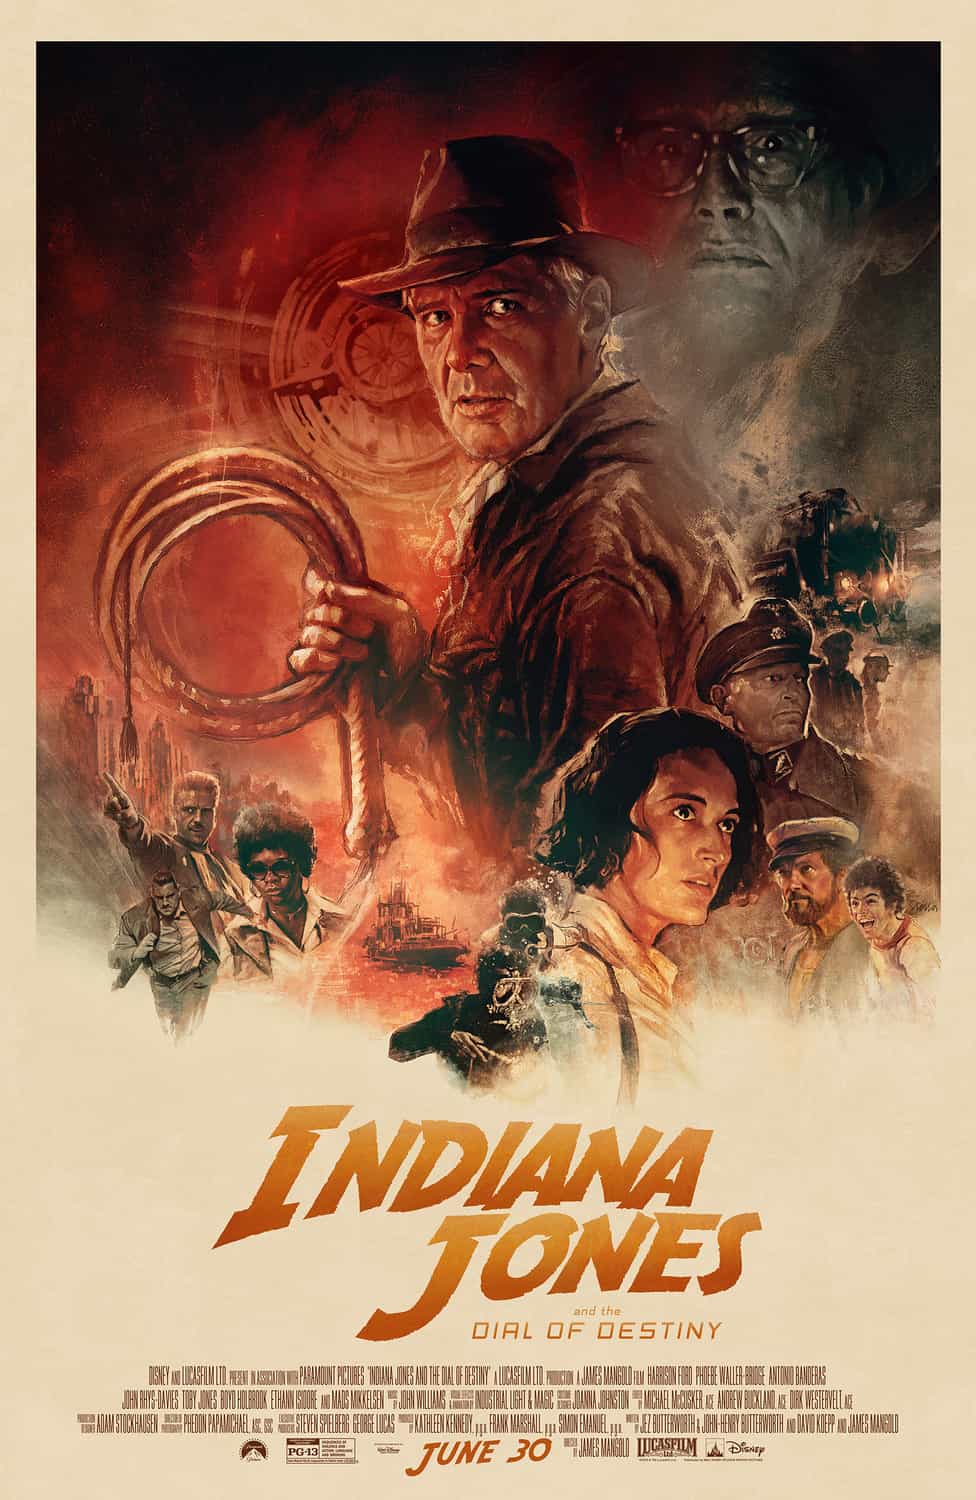 Trailer, poster and title revealed for Indiana Jones and the Dial of Destiny starring Harrison Ford - movie UK release date 30th June 2023 #indianajonesandthedialofdestiny